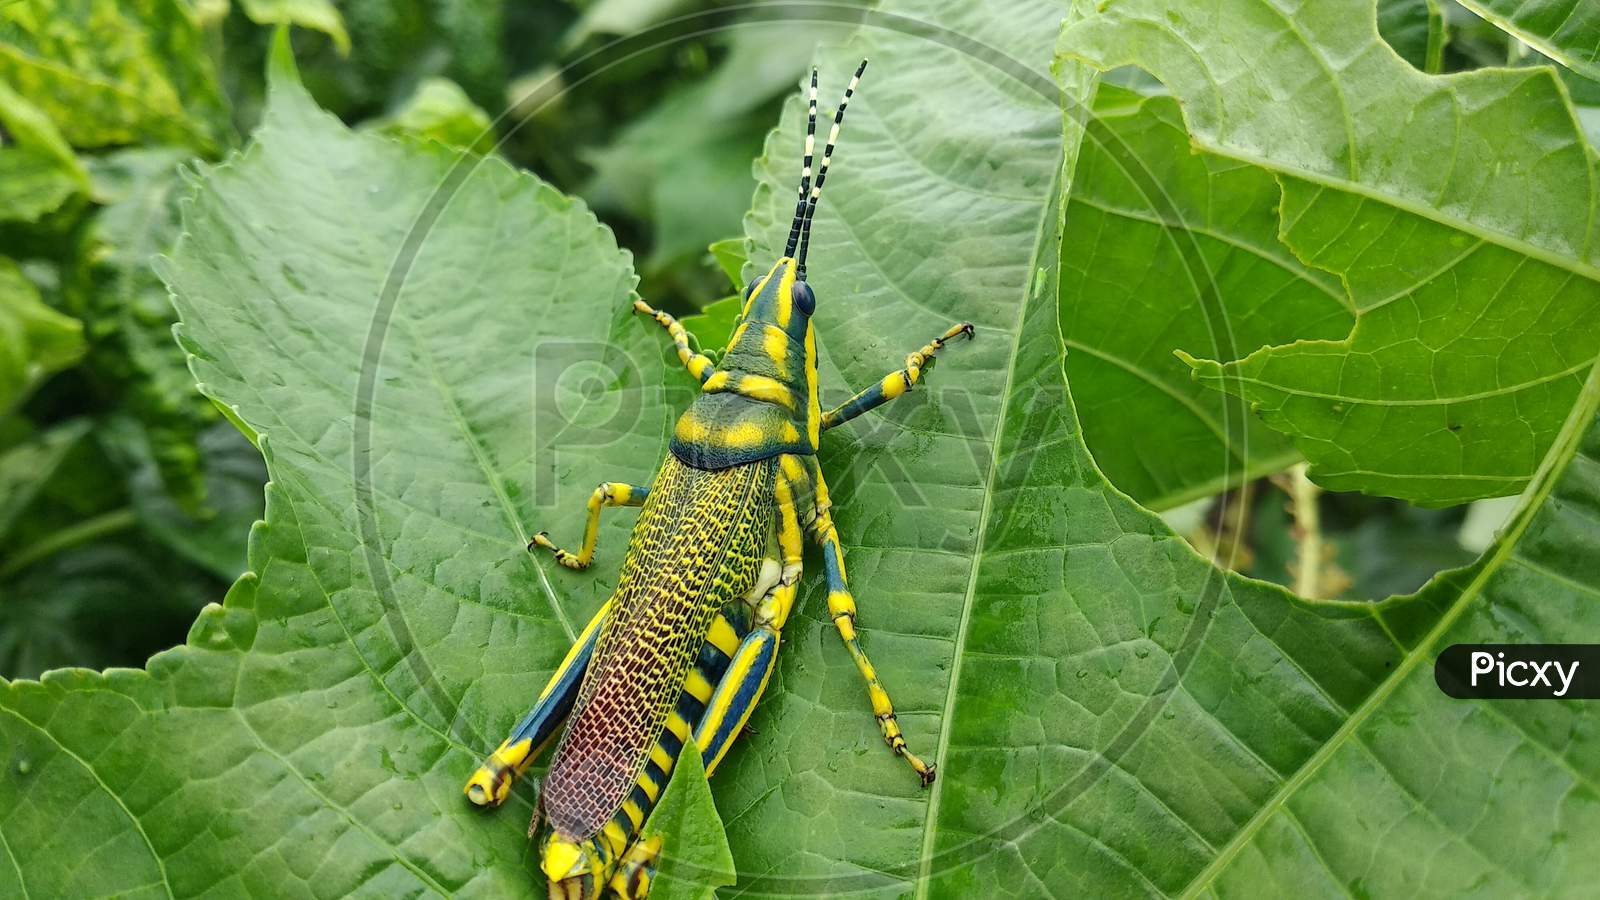 A Grasshopper is sitting on castor leaves in india 24 august 2020.